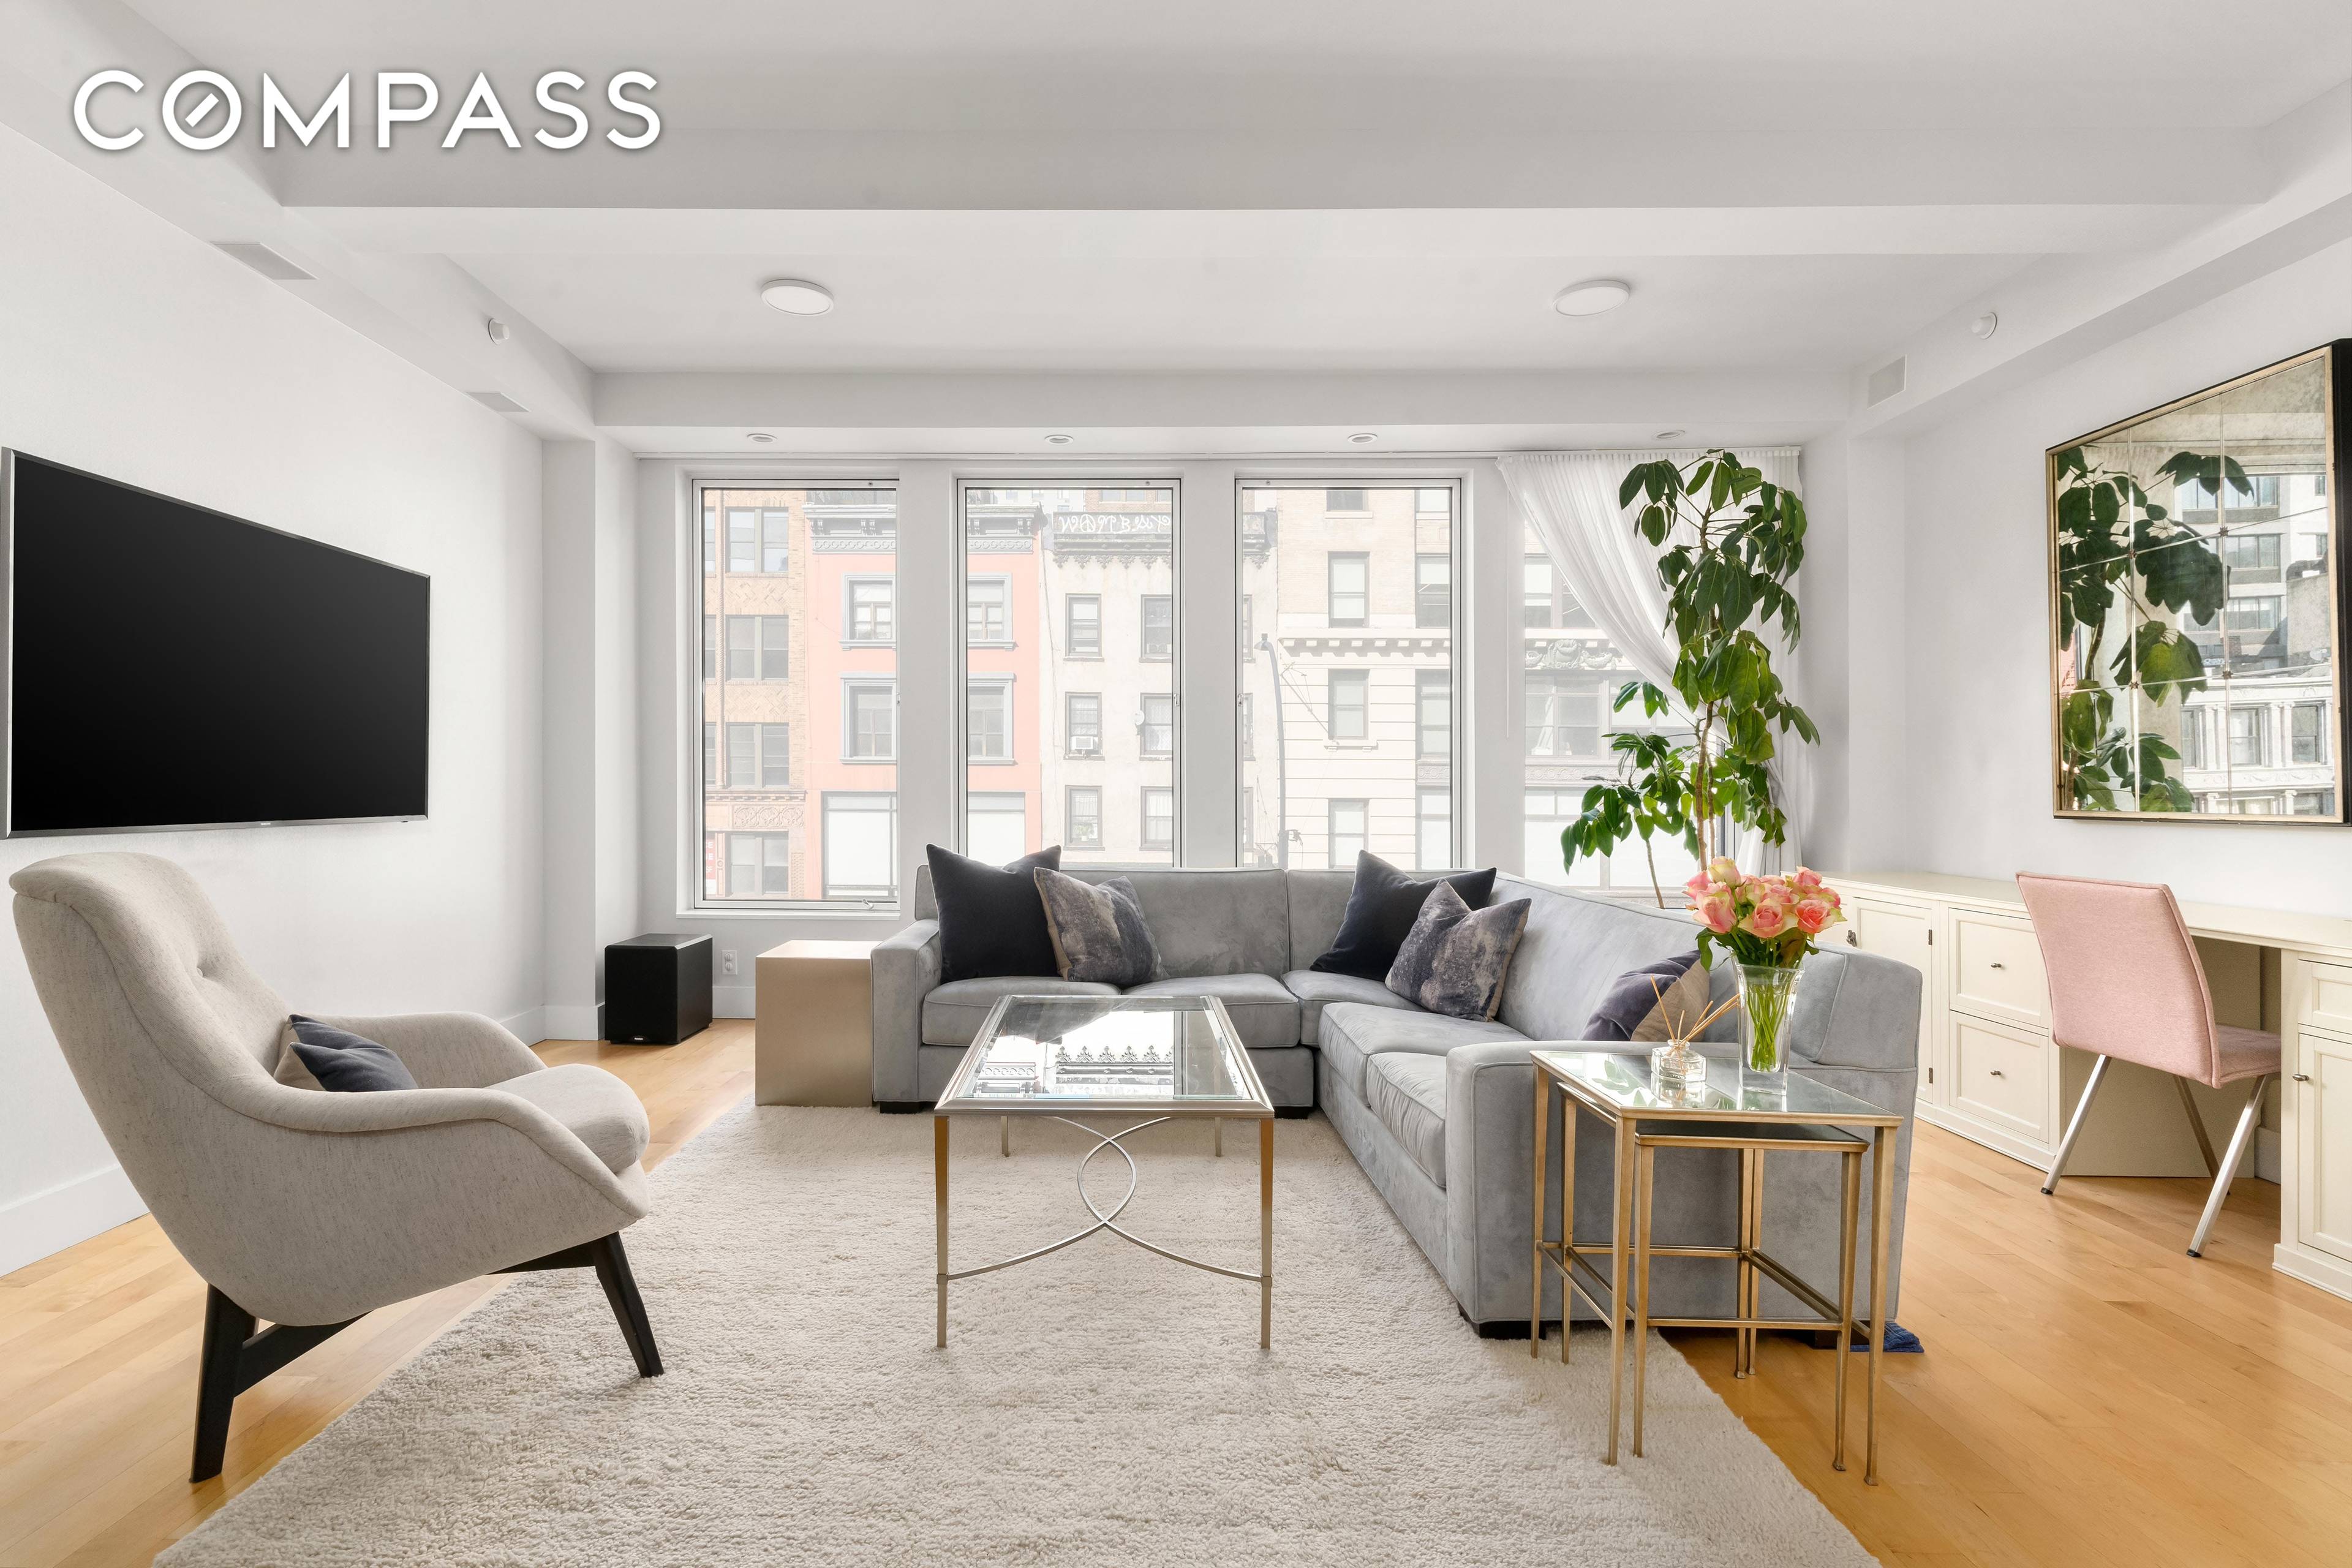 Enter directly off the elevator into this bright and quiet full floor condo loft apartment with very low monthly charges amp ; taxes in Chelsea.